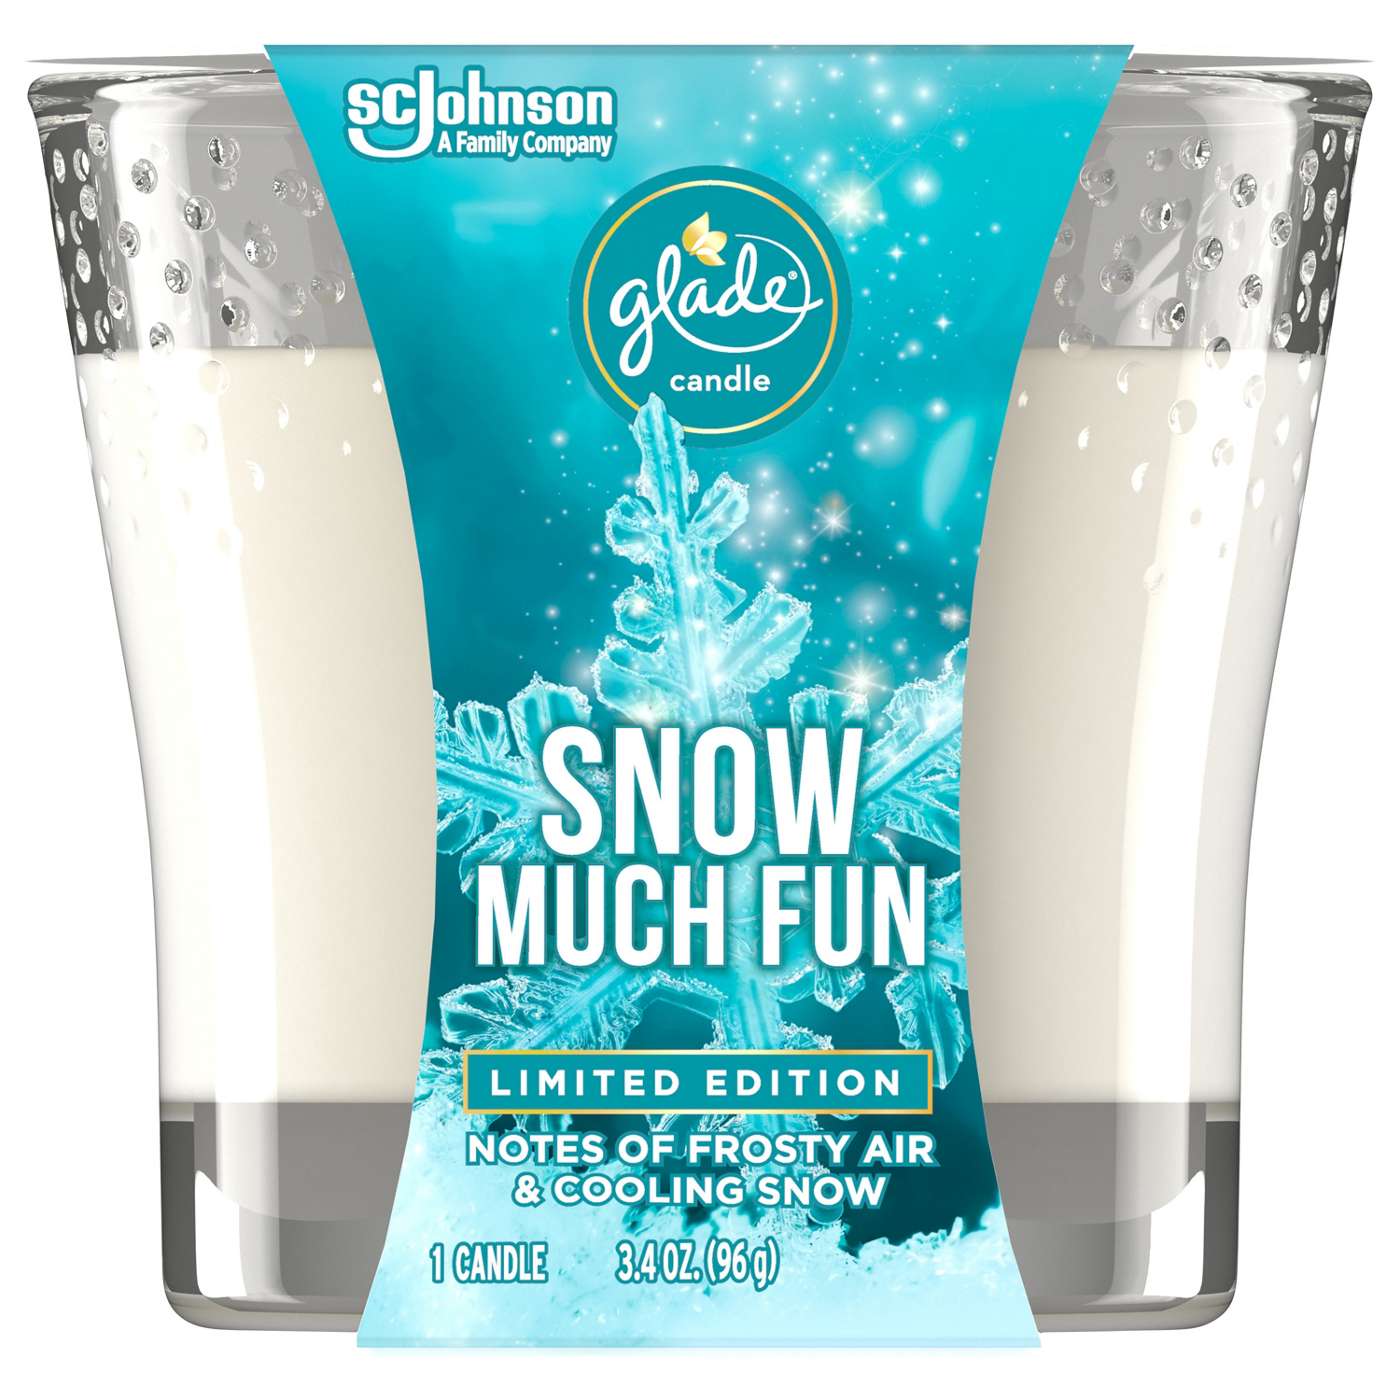 Glade Snow Much Fun Holiday Candle; image 3 of 3